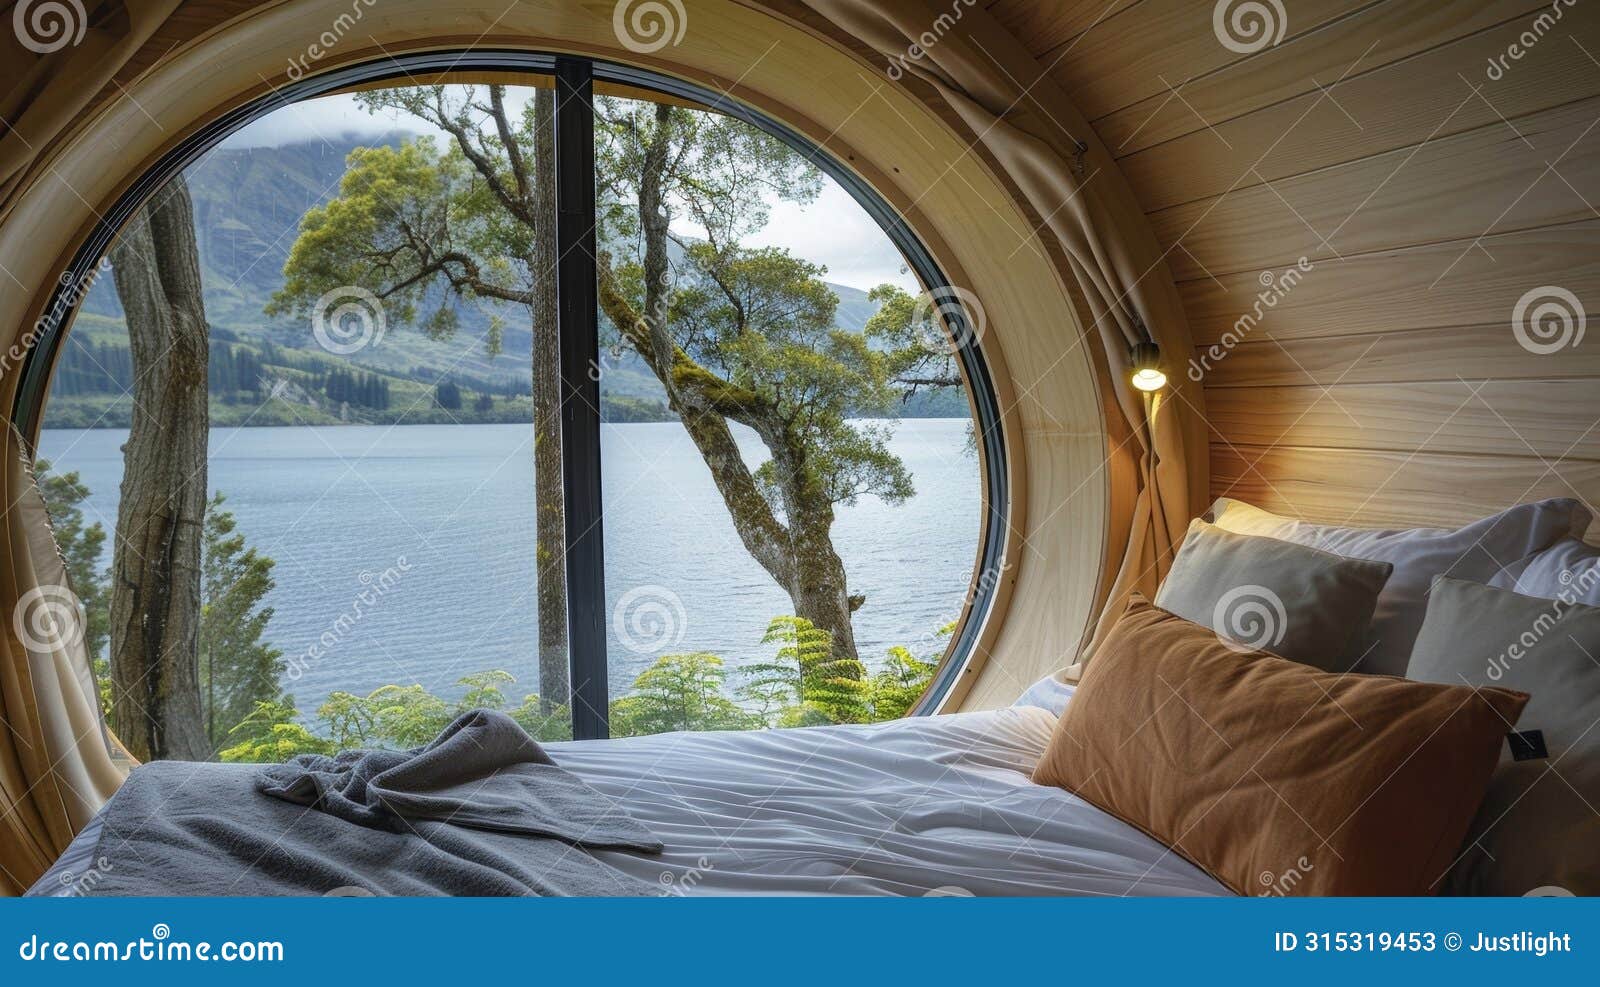 a tranquil lake view from the window of a pod offering the perfect backdrop for a restful slumber. 2d flat cartoon